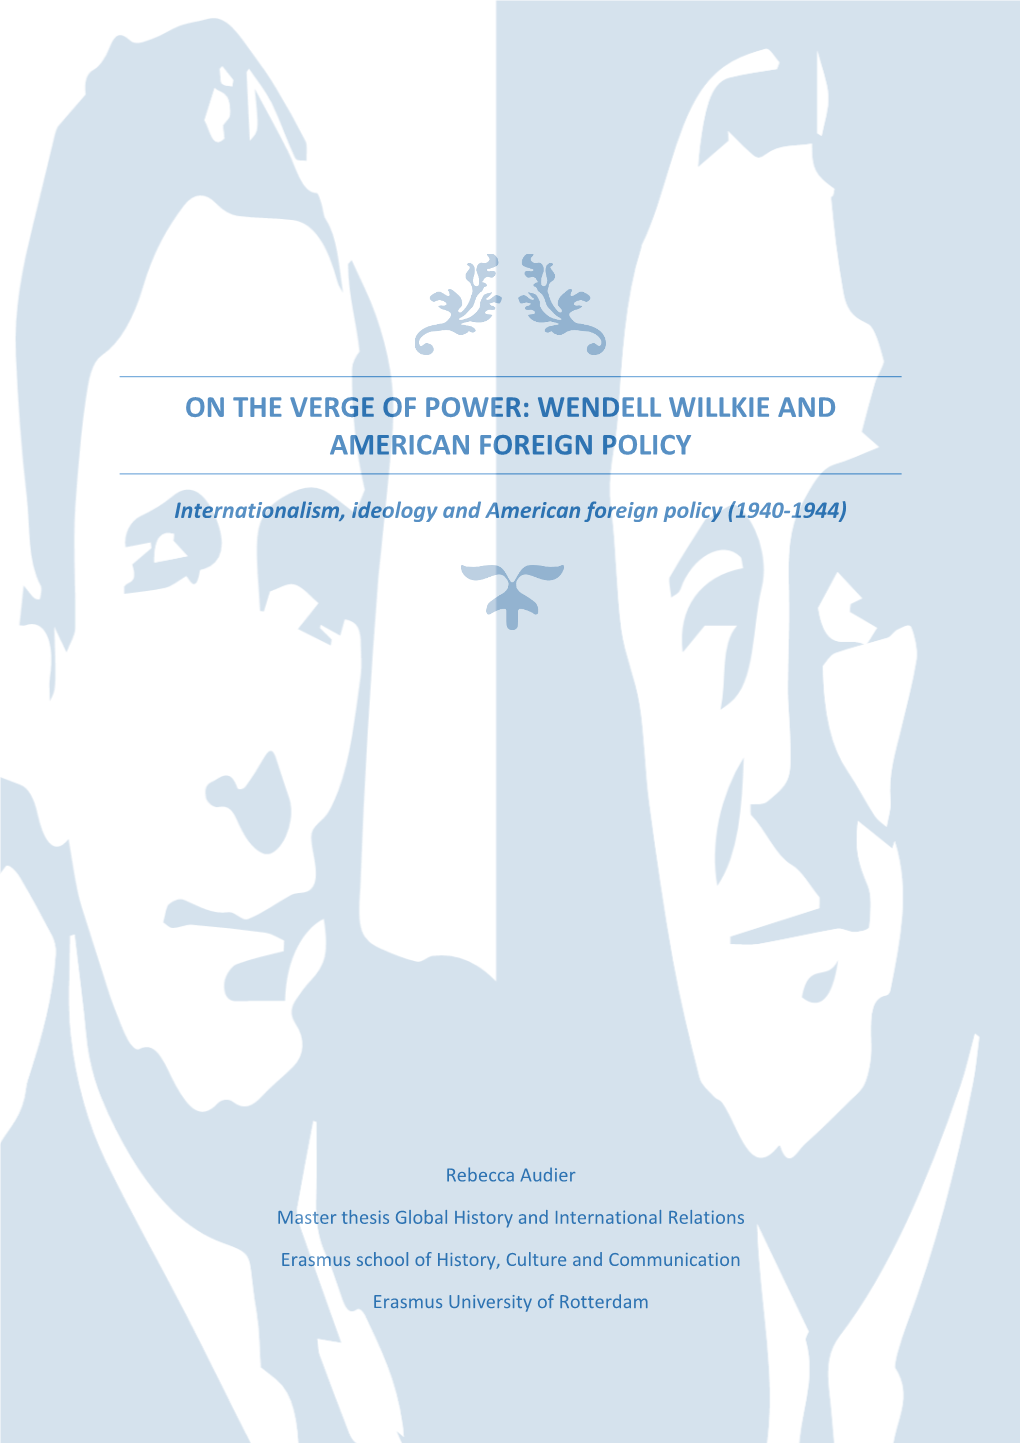 On the Verge of Power: Wendell Willkie and American Foreign Policy